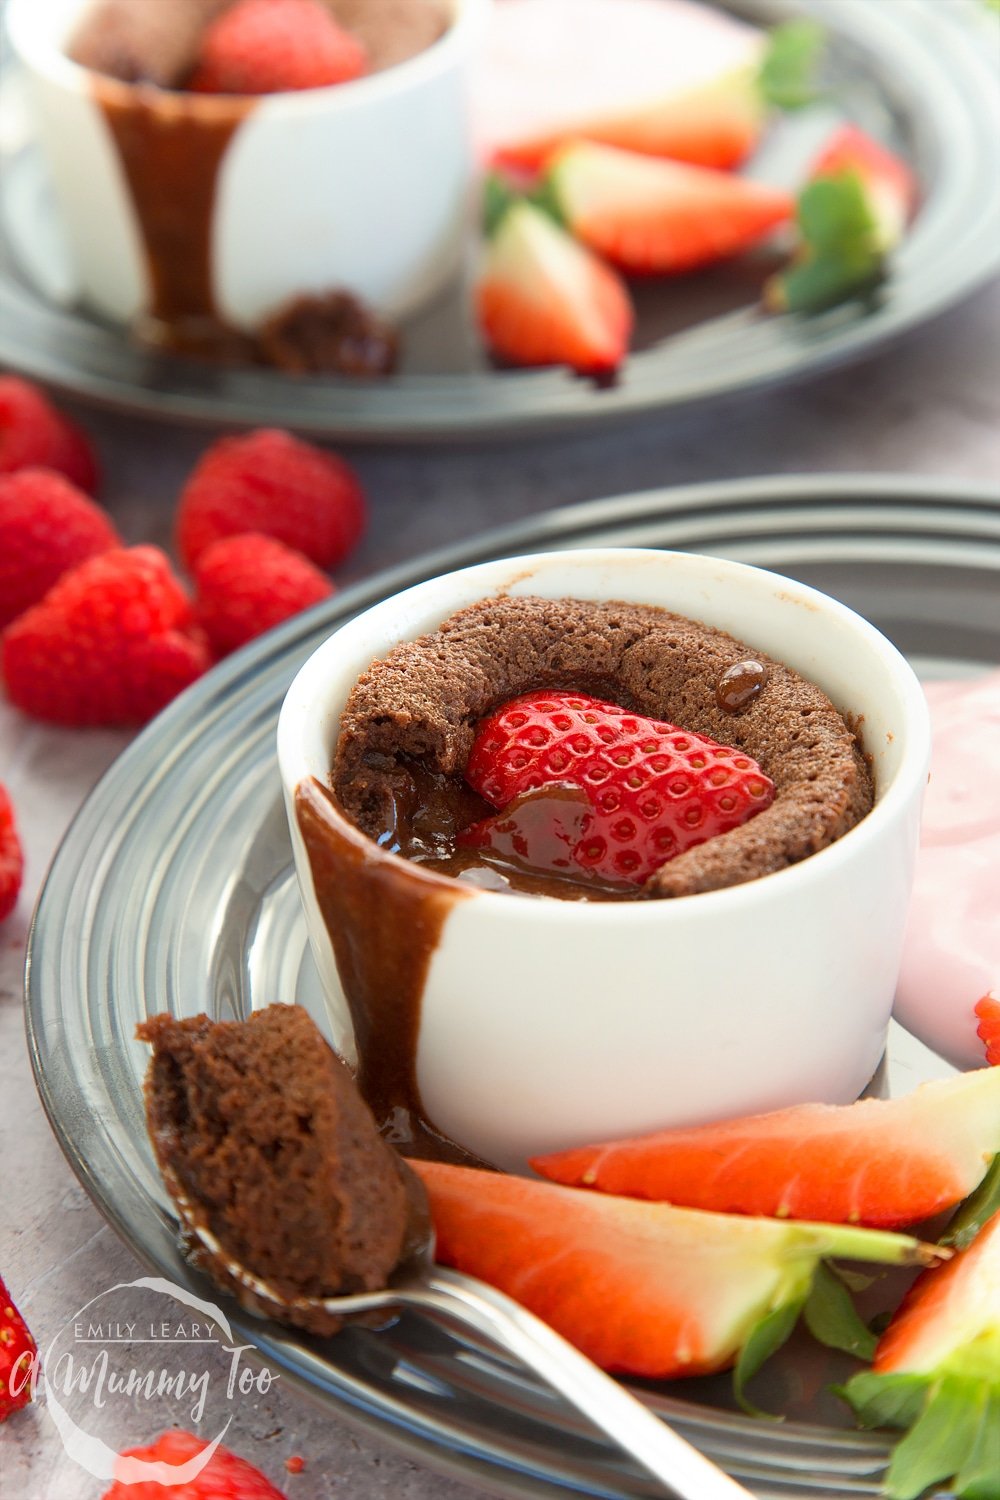 This strawberry hot chocolate pudding is a deliciously decadent treat for a special occasion